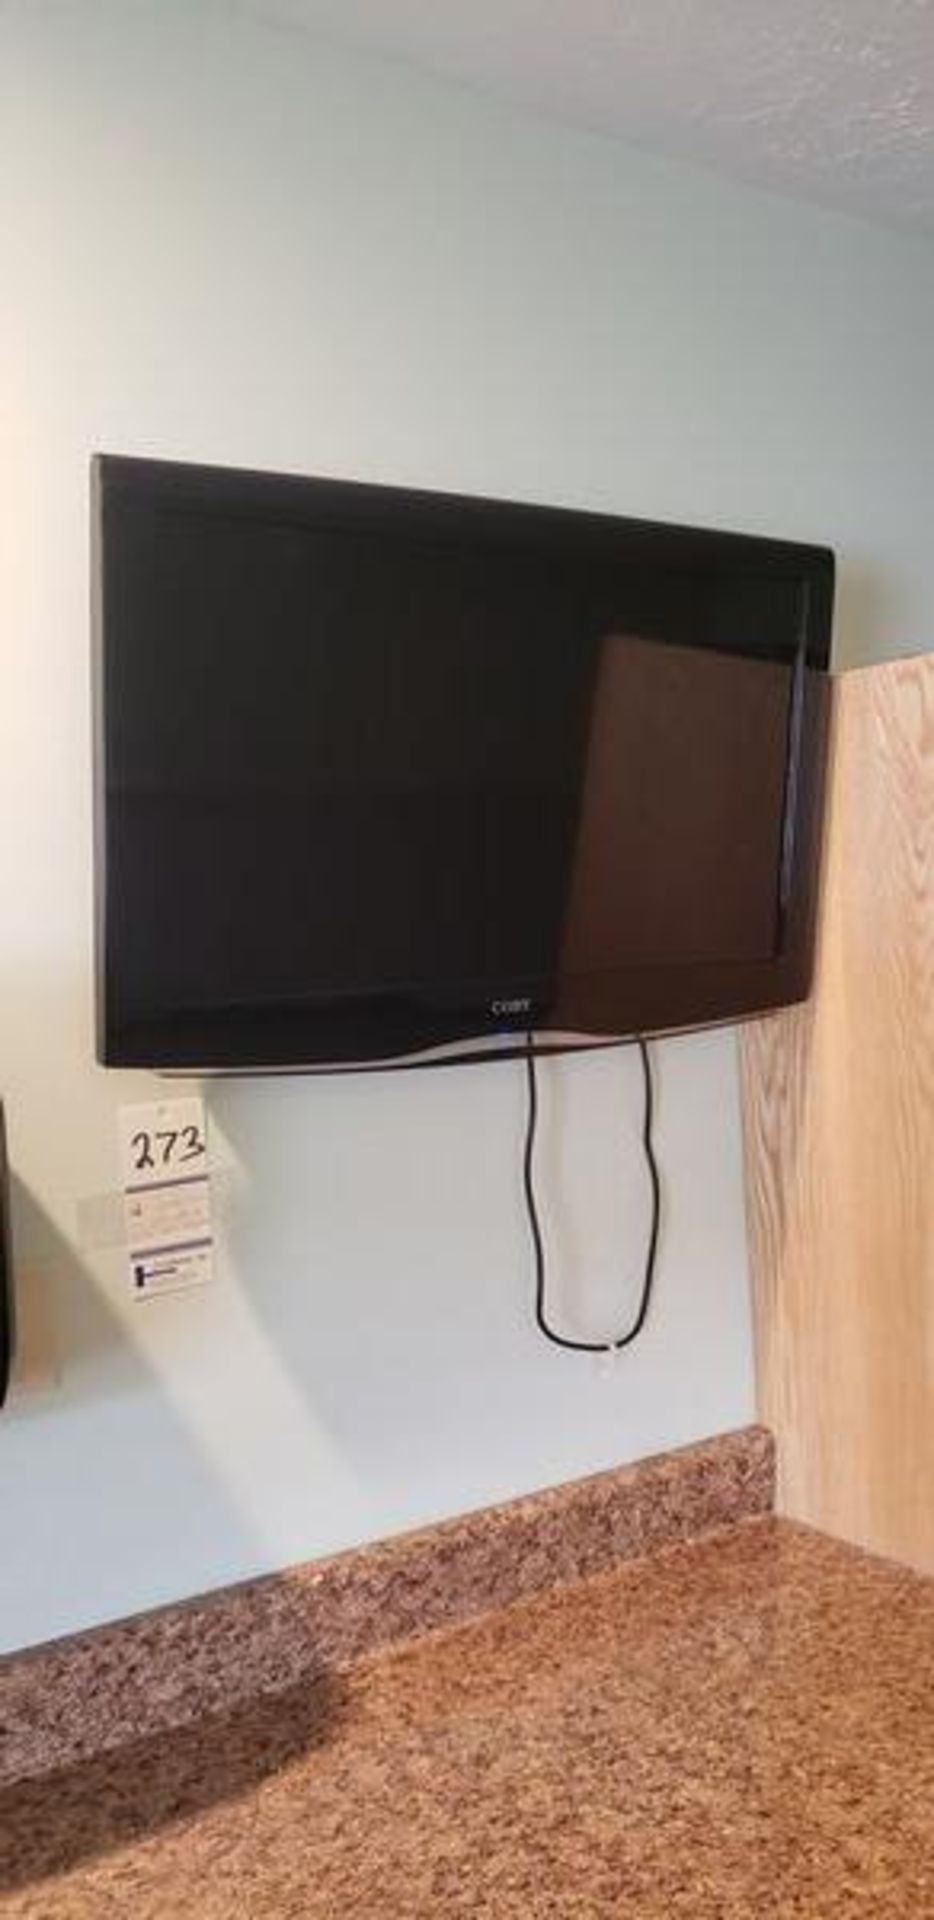 32" COBY TV WITH REMOTE AND EXTRA WALL MOUNT